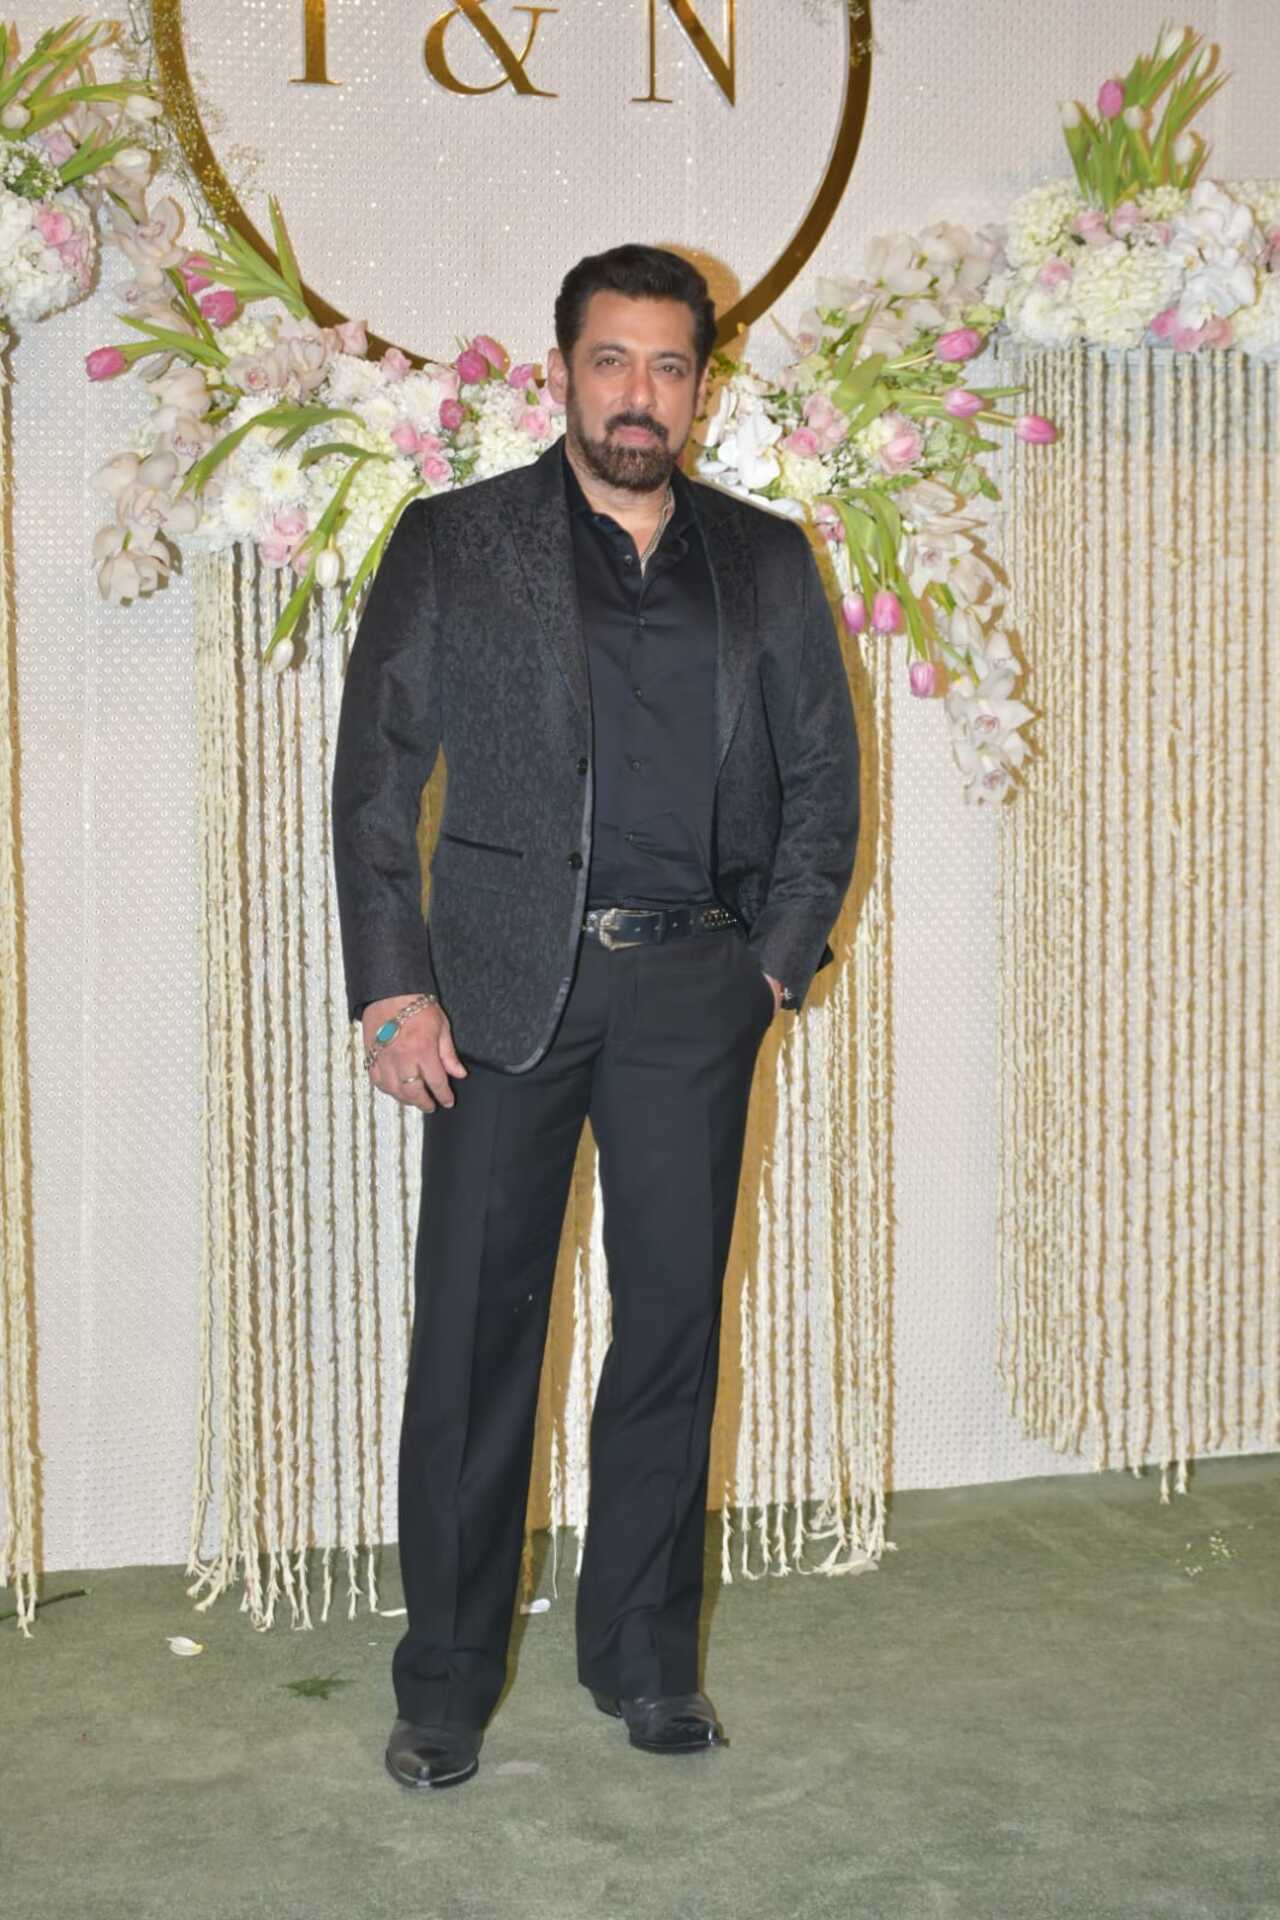 Salman Khan looked dashing in an all-black suit. He was seen sporting his new mustache and beard look. Fans noticed that he looked younger than before with this new look